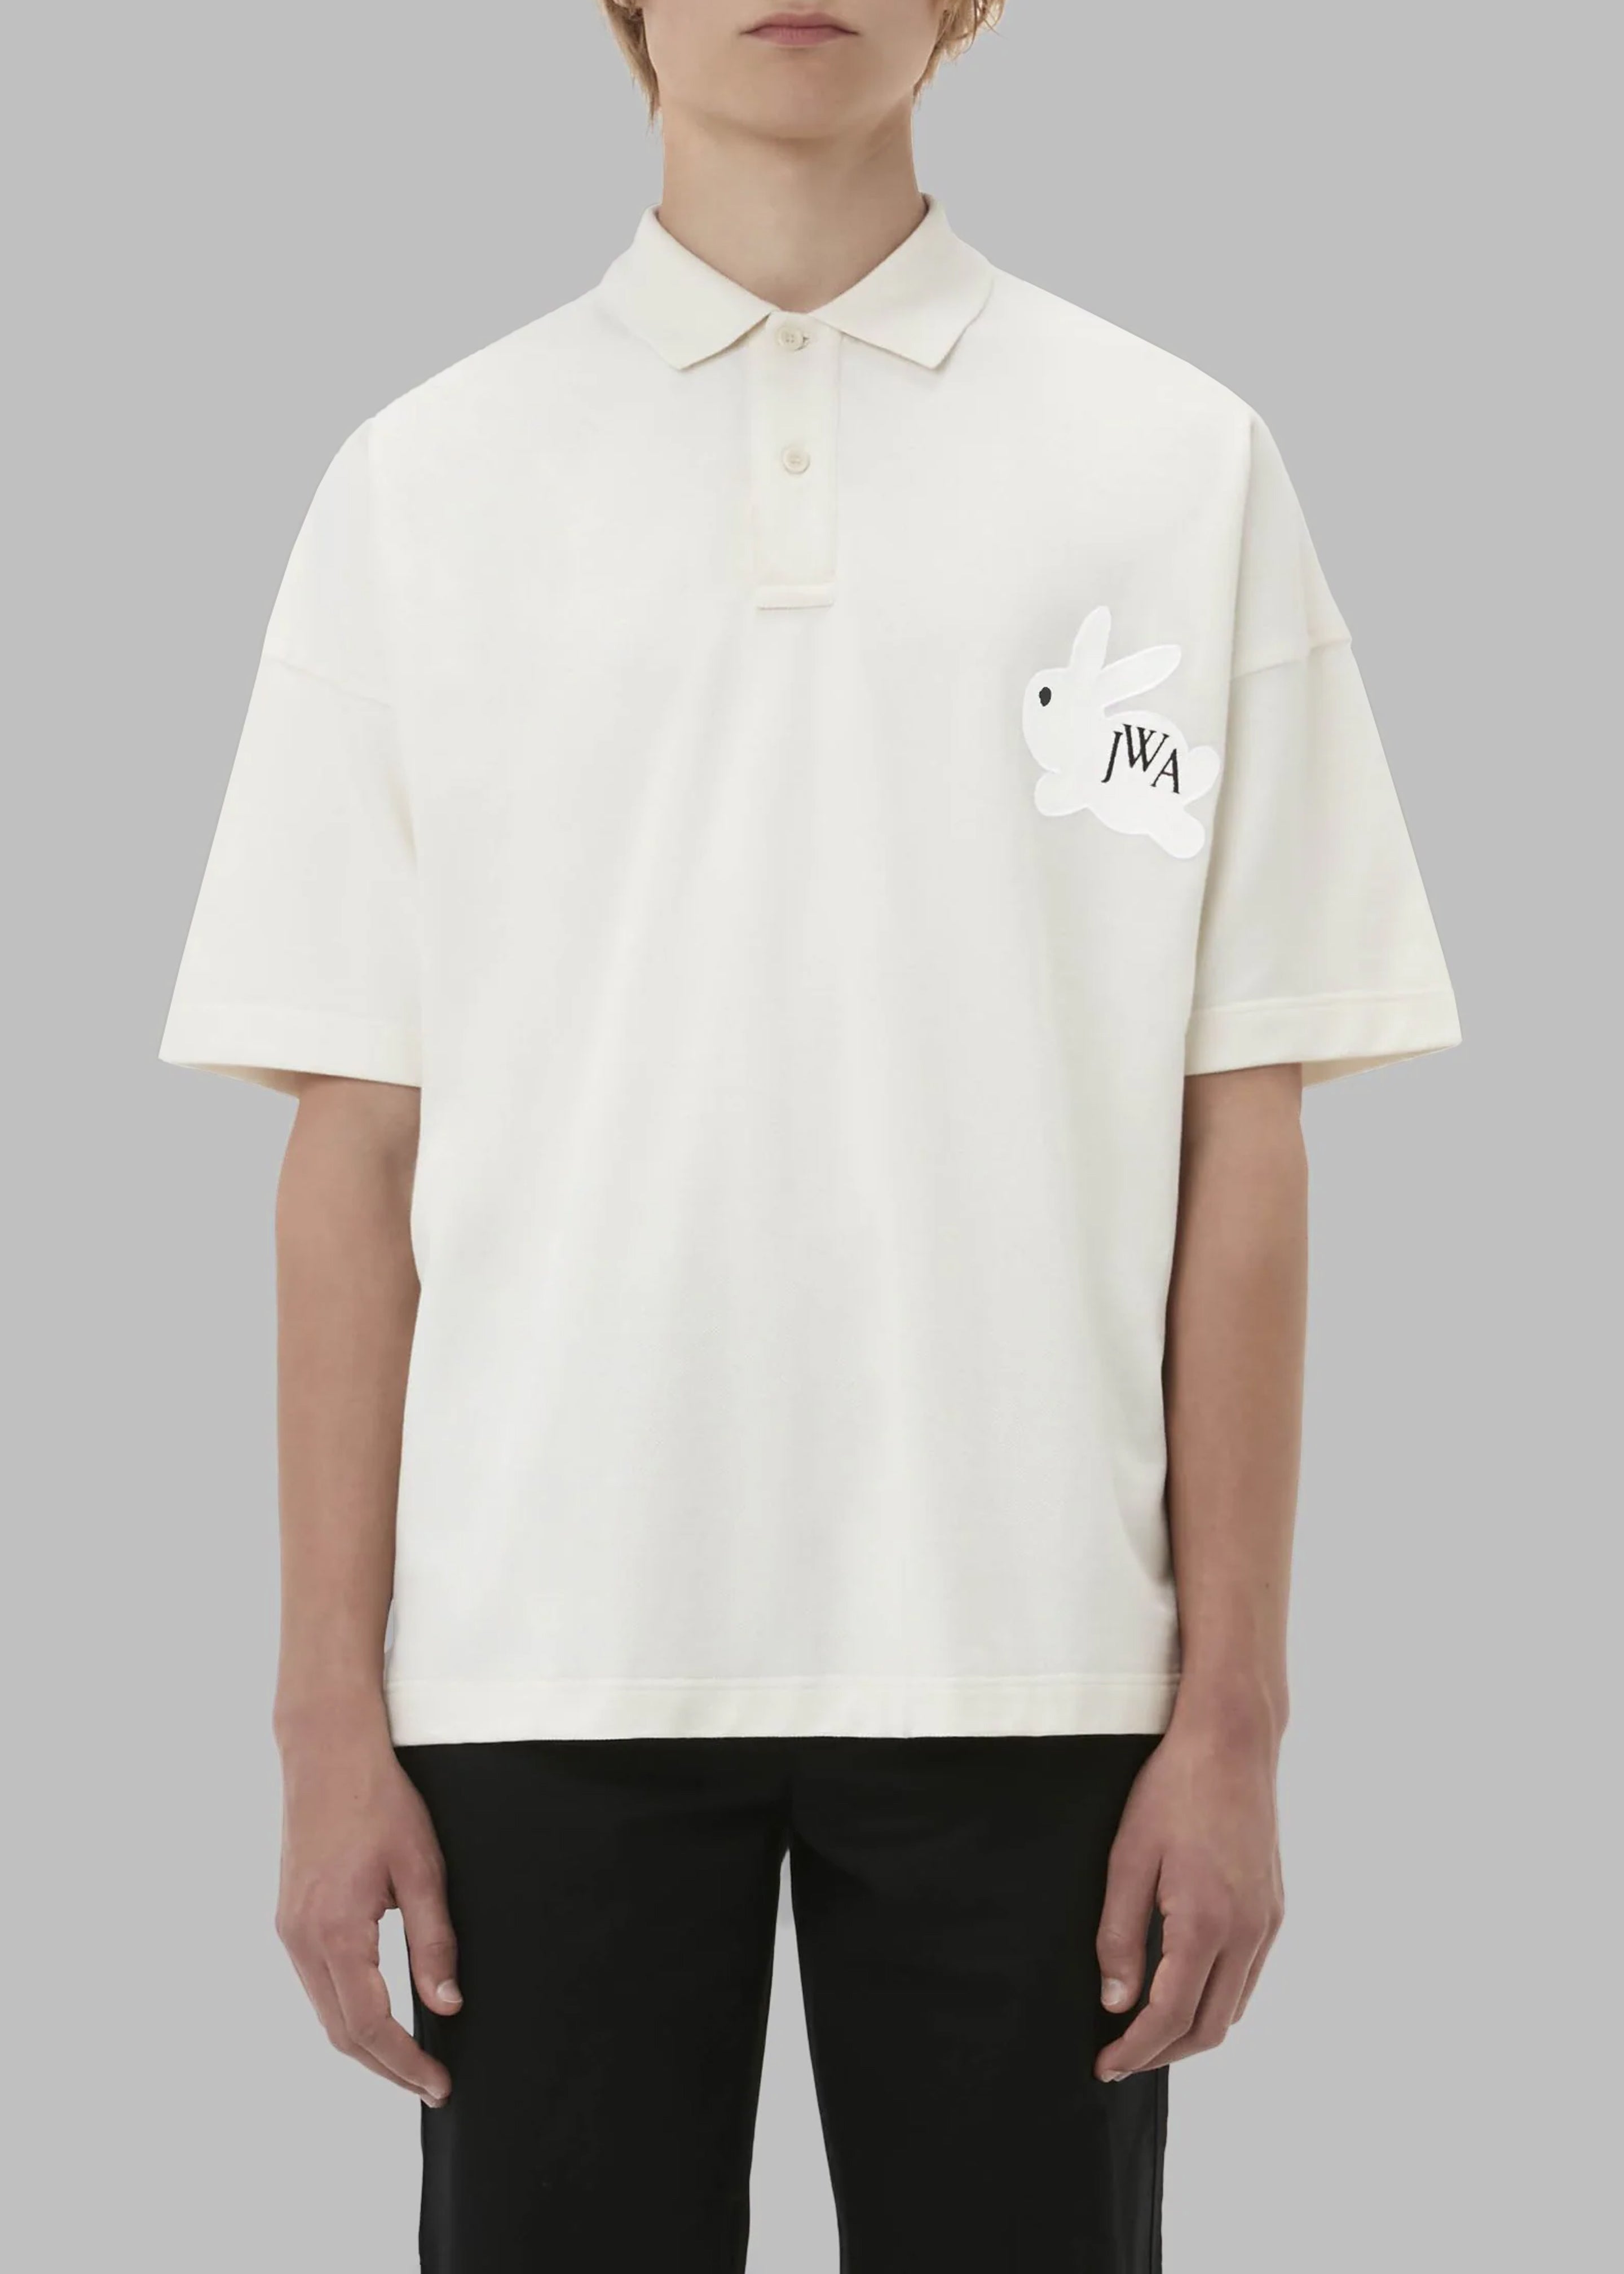 JW Anderson Bunny Embroidery Polo Shirt - Beige - 2